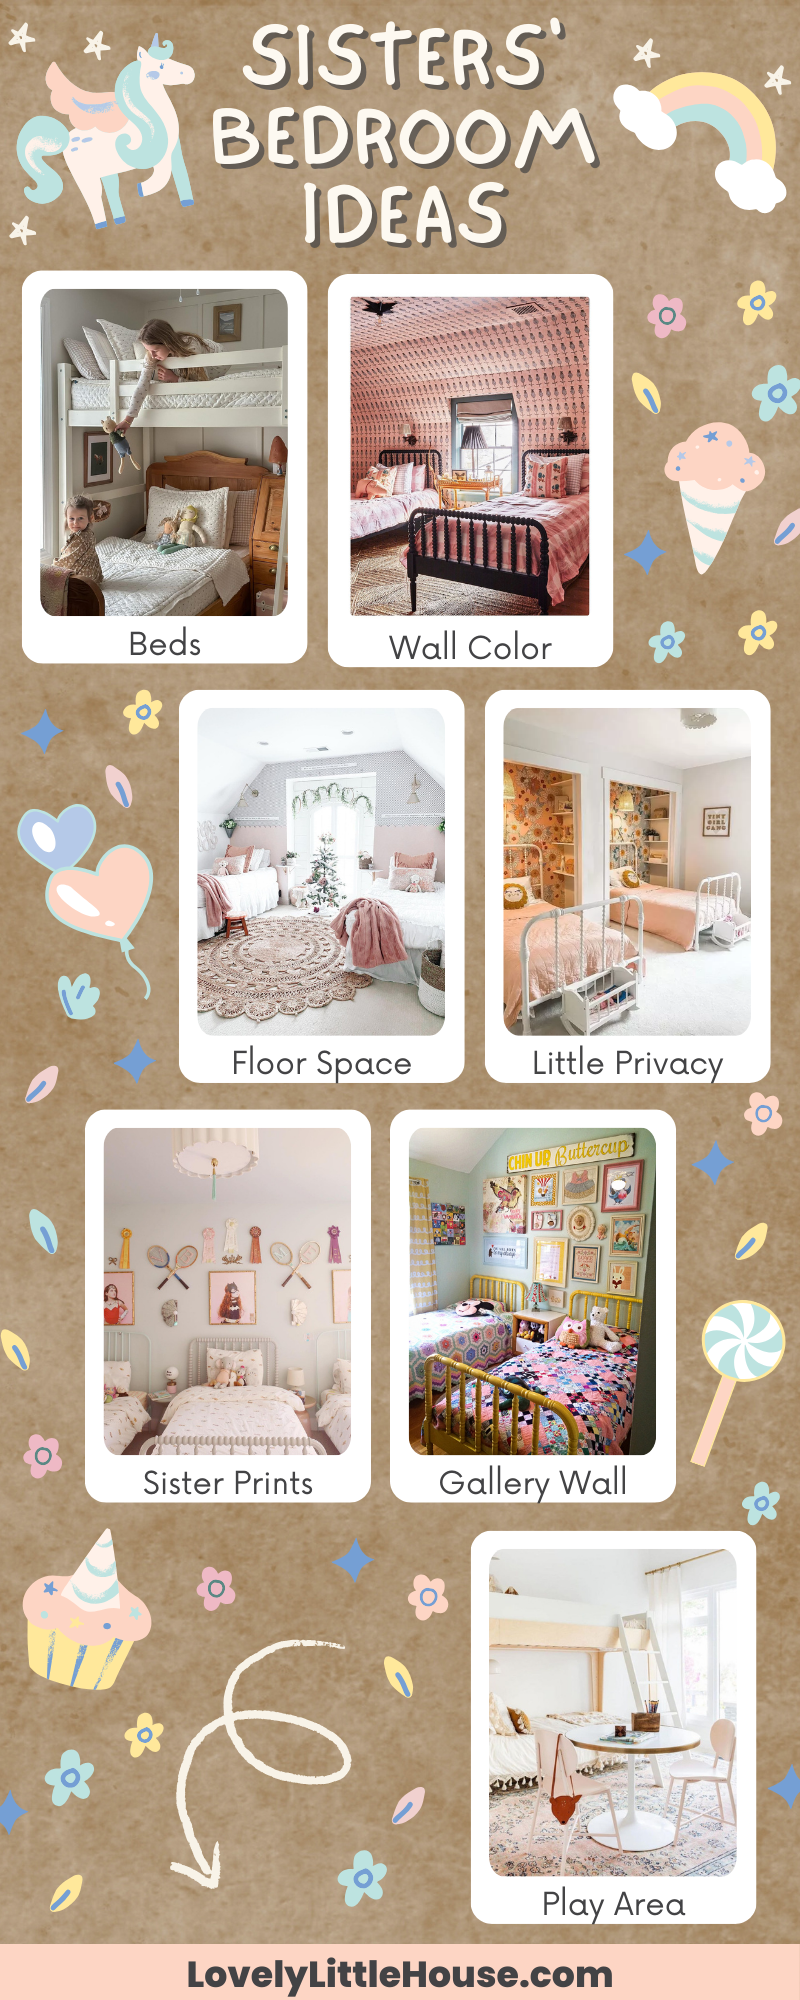 An infographics about 7 sisters' bedroom ideas for a cozy shared space